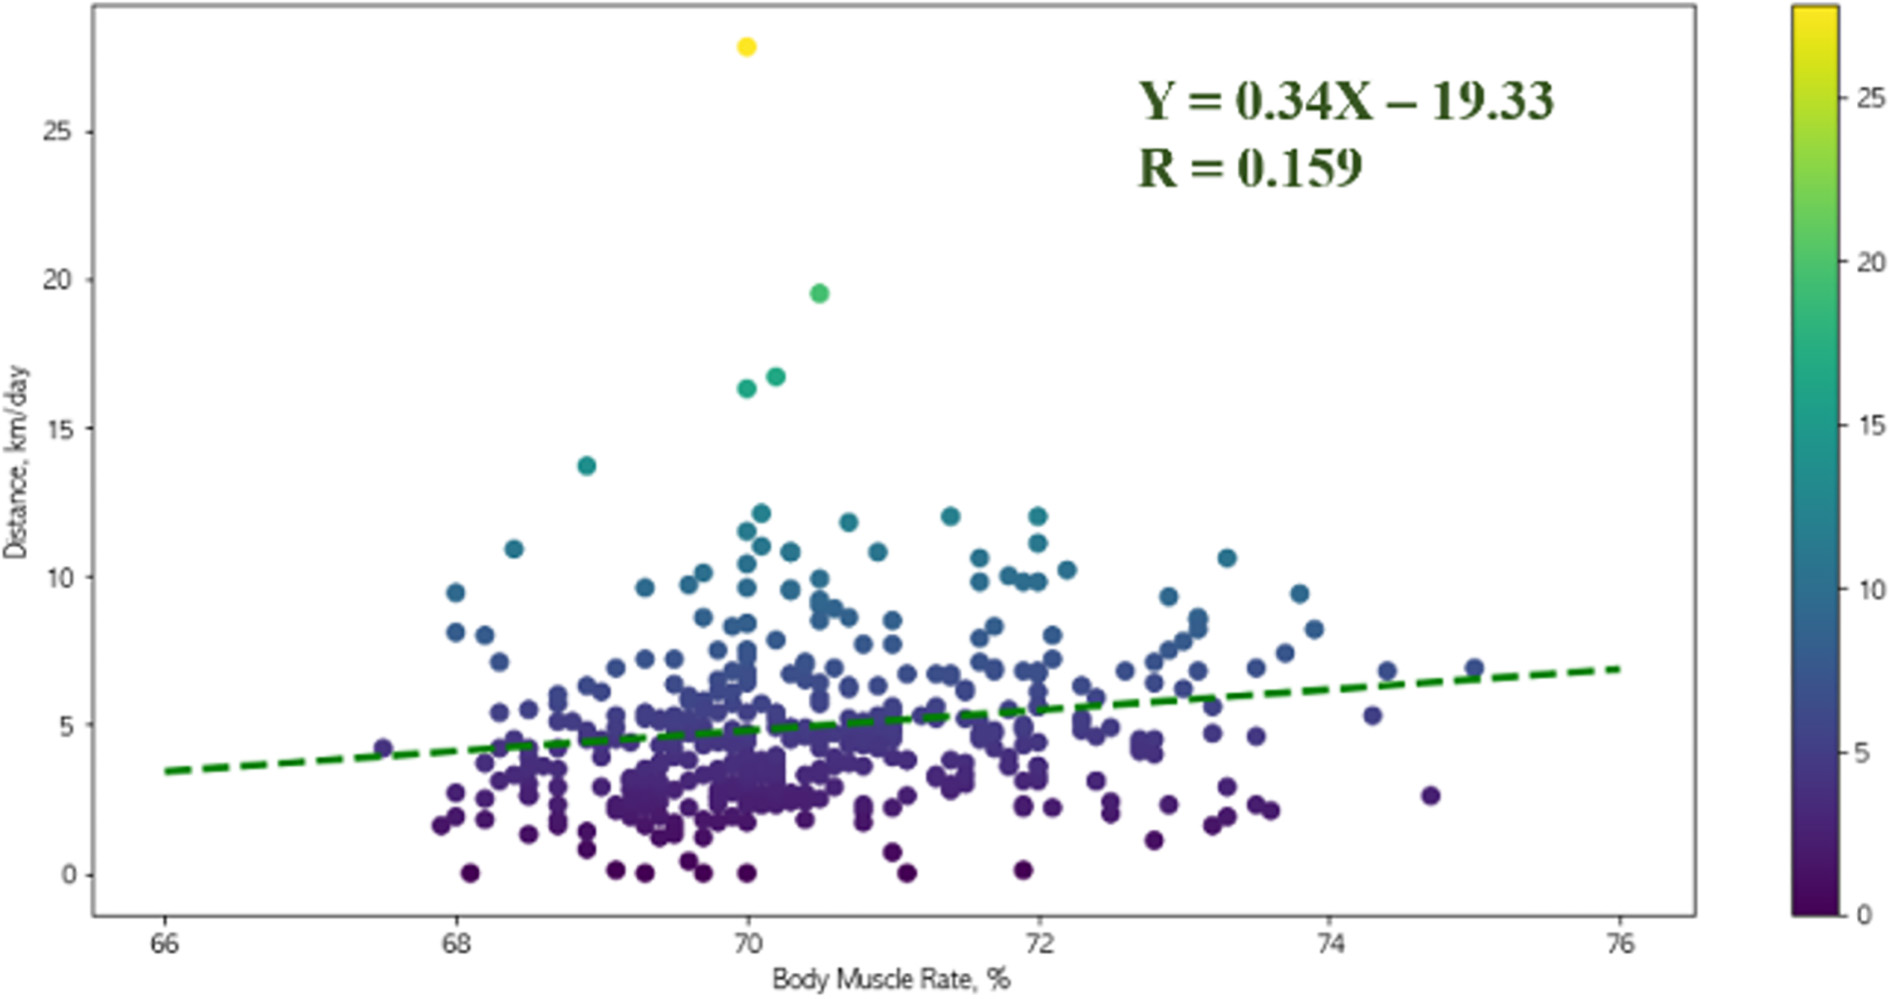 Analysis of the correlation between the exercise distance and body muscle rate.